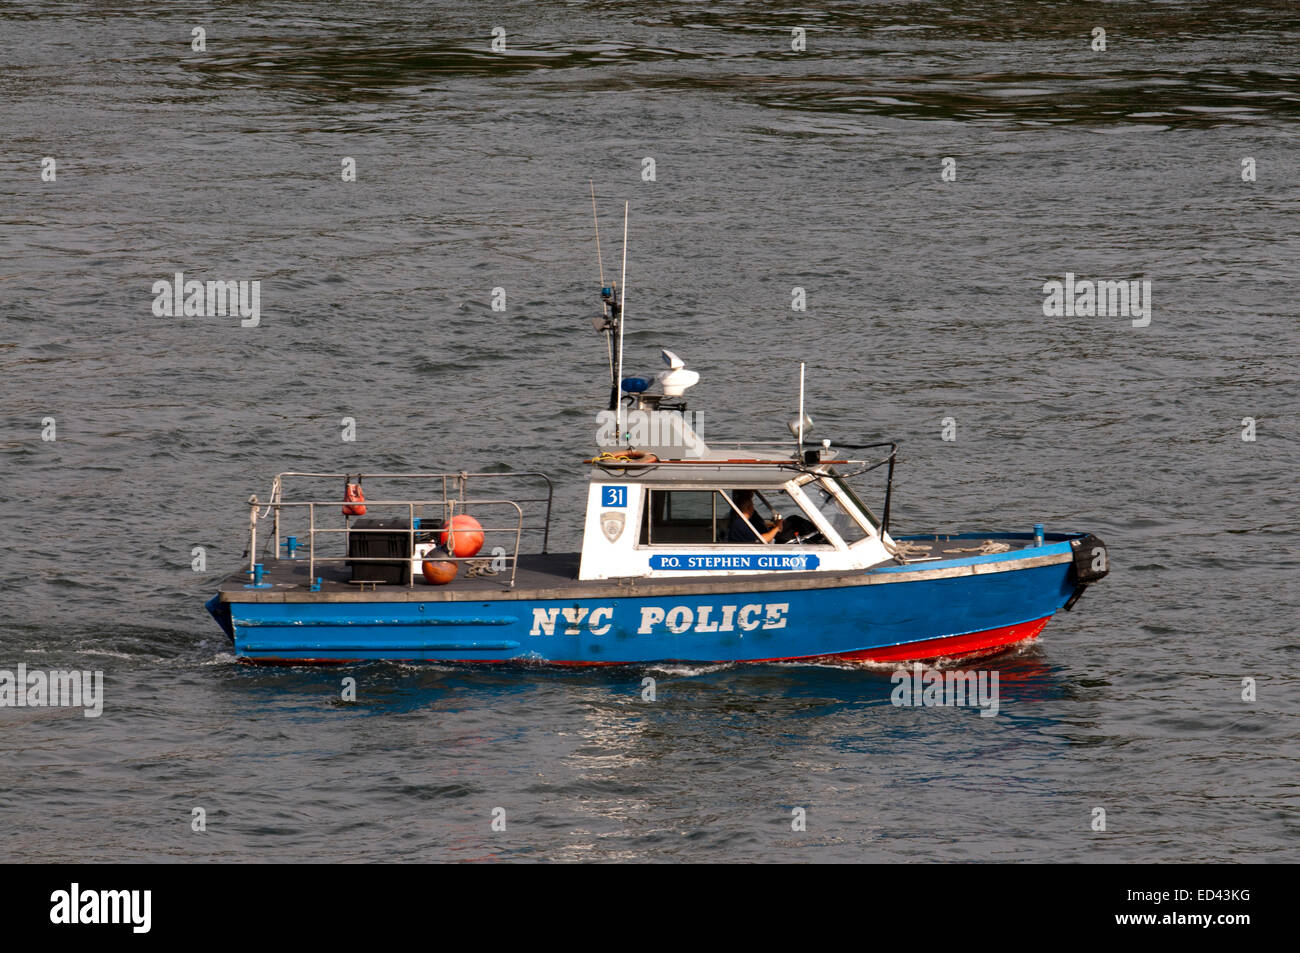 New York city police boat. New York City police boat patrols the Hudson River. Police watercraft. Police watercraft are boats or other vessels that are used by police agencies to patrol bodies of water. They are usually employed on major rivers, in enclosed harbors near cities or in places where a stronger presence than that offered by the Harbourmaster or Coast Guard is needed. Police boats sometimes have high-performance engines in order to catch up with fleeing fugitives on the water. They have been used since the beginning of the 20th century. Stock Photo